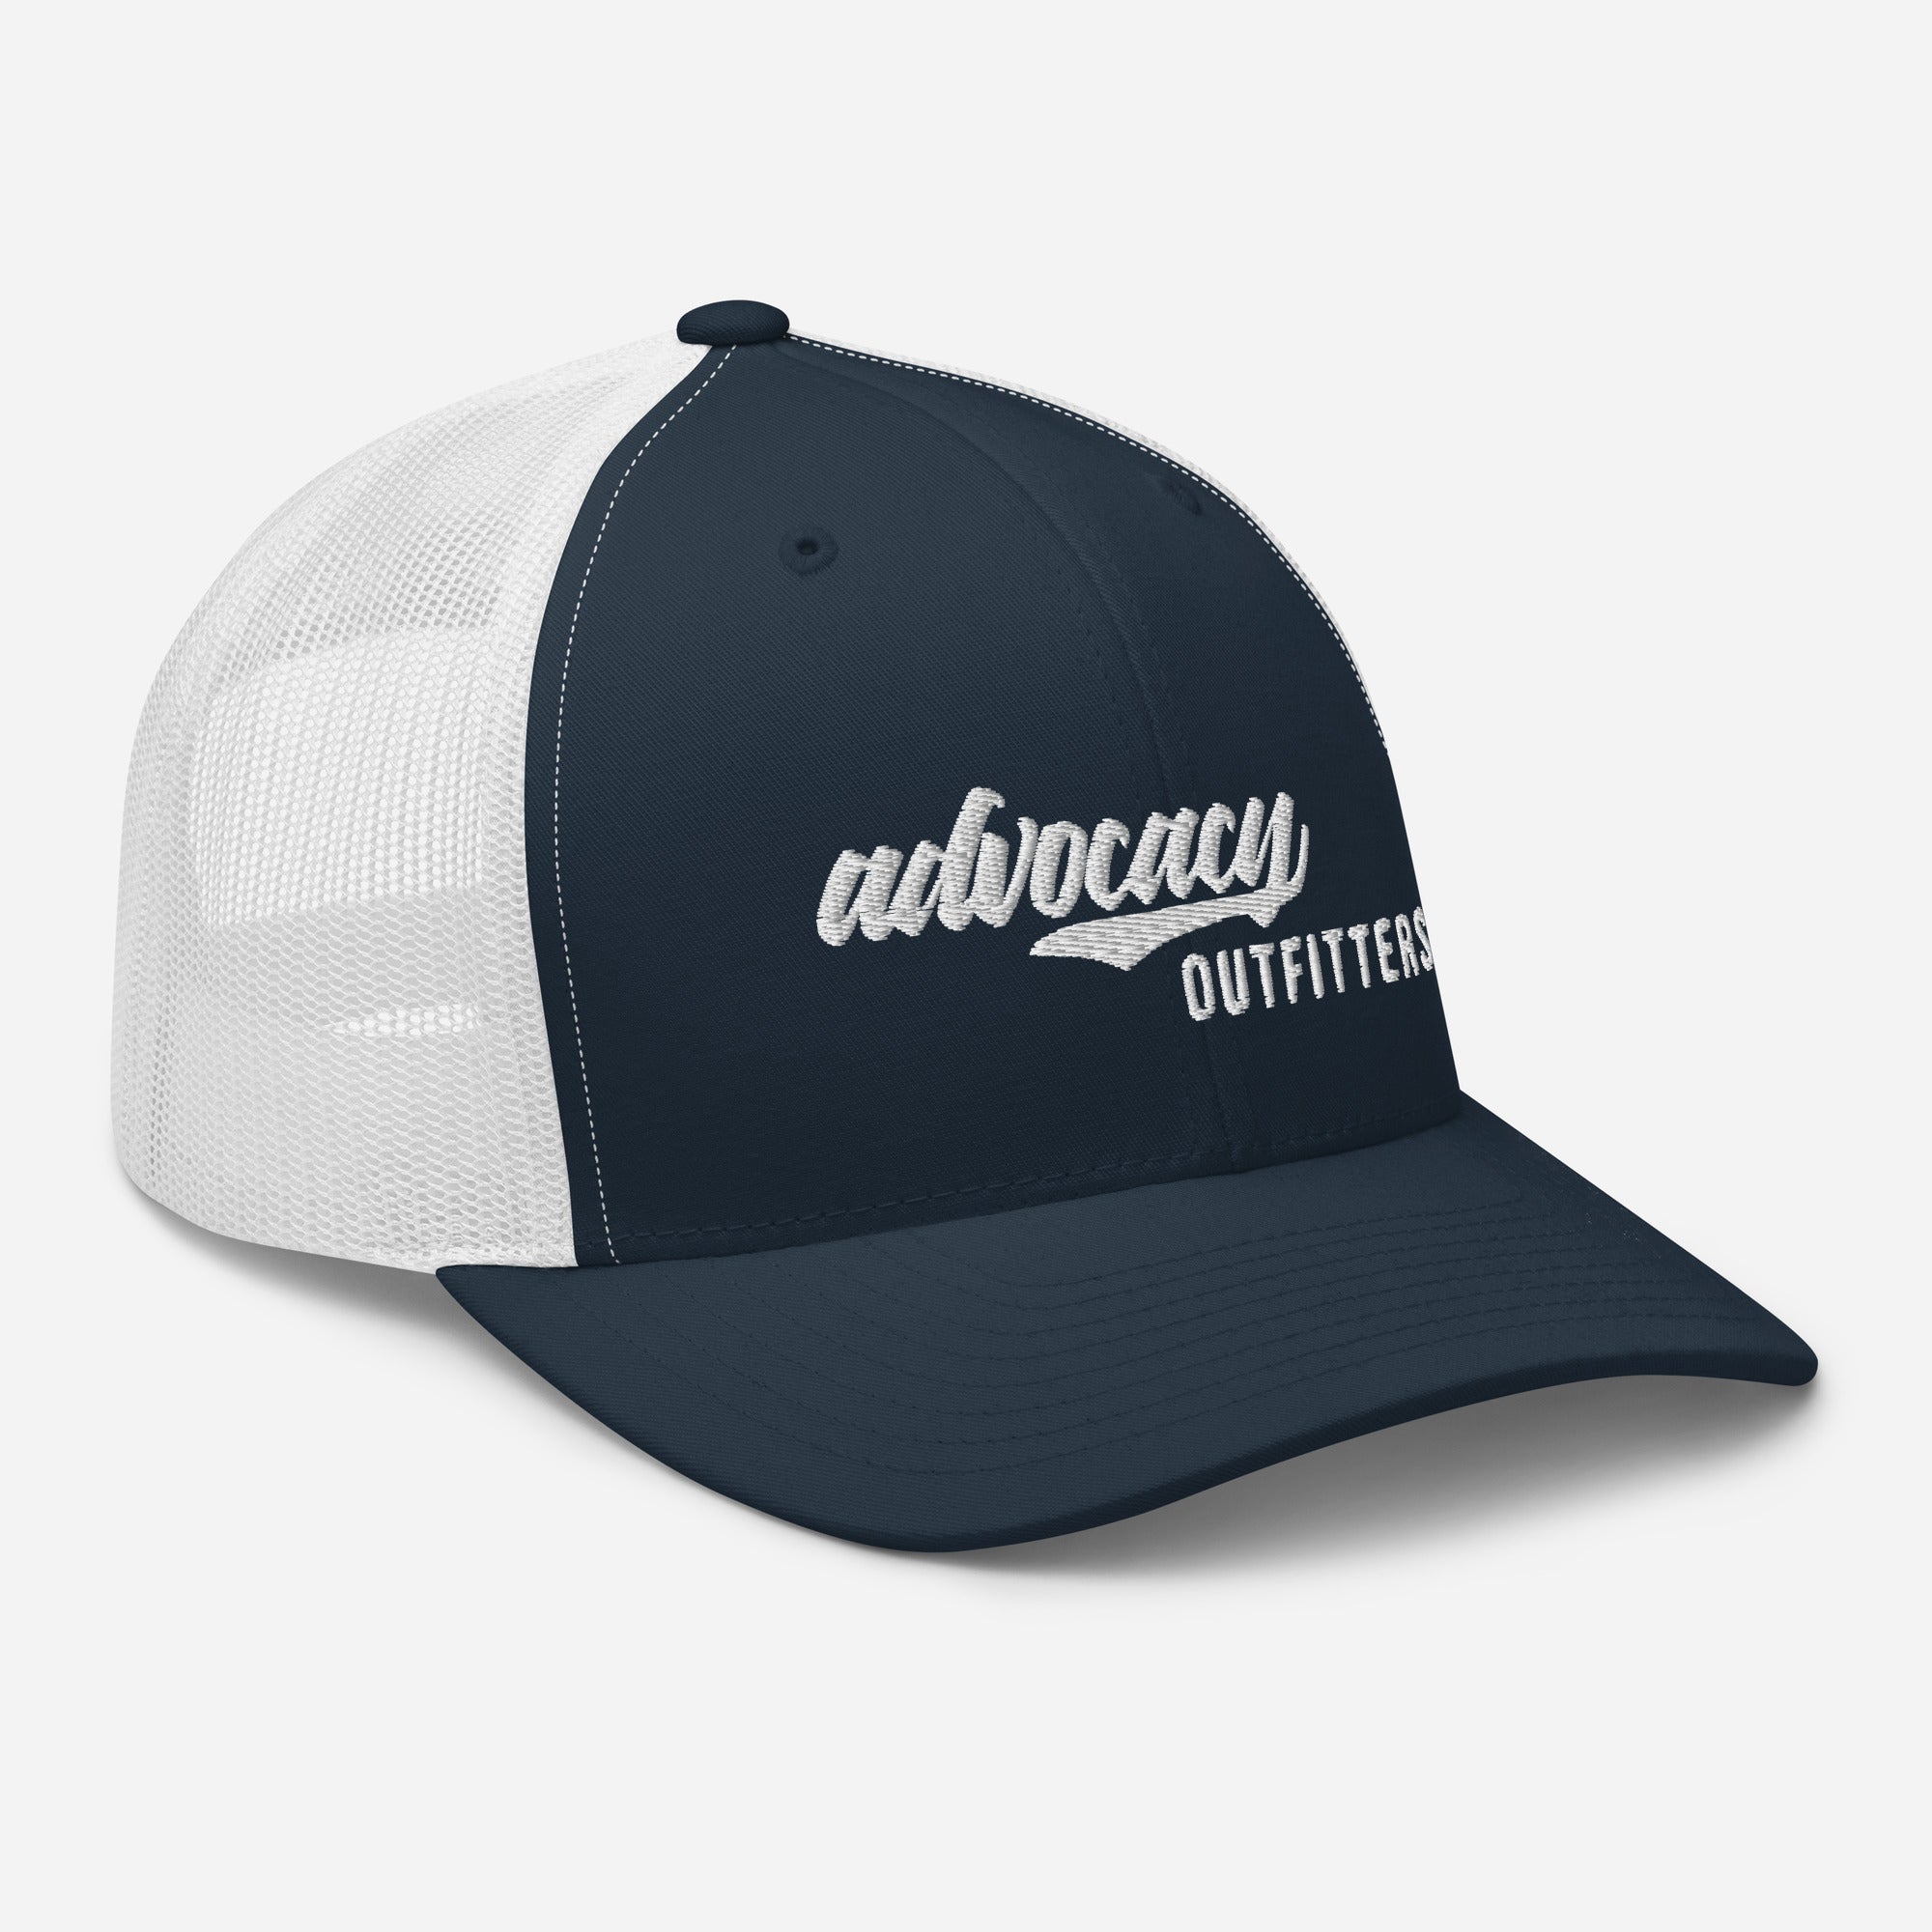 Advocacy Outfitters Trucker Cap